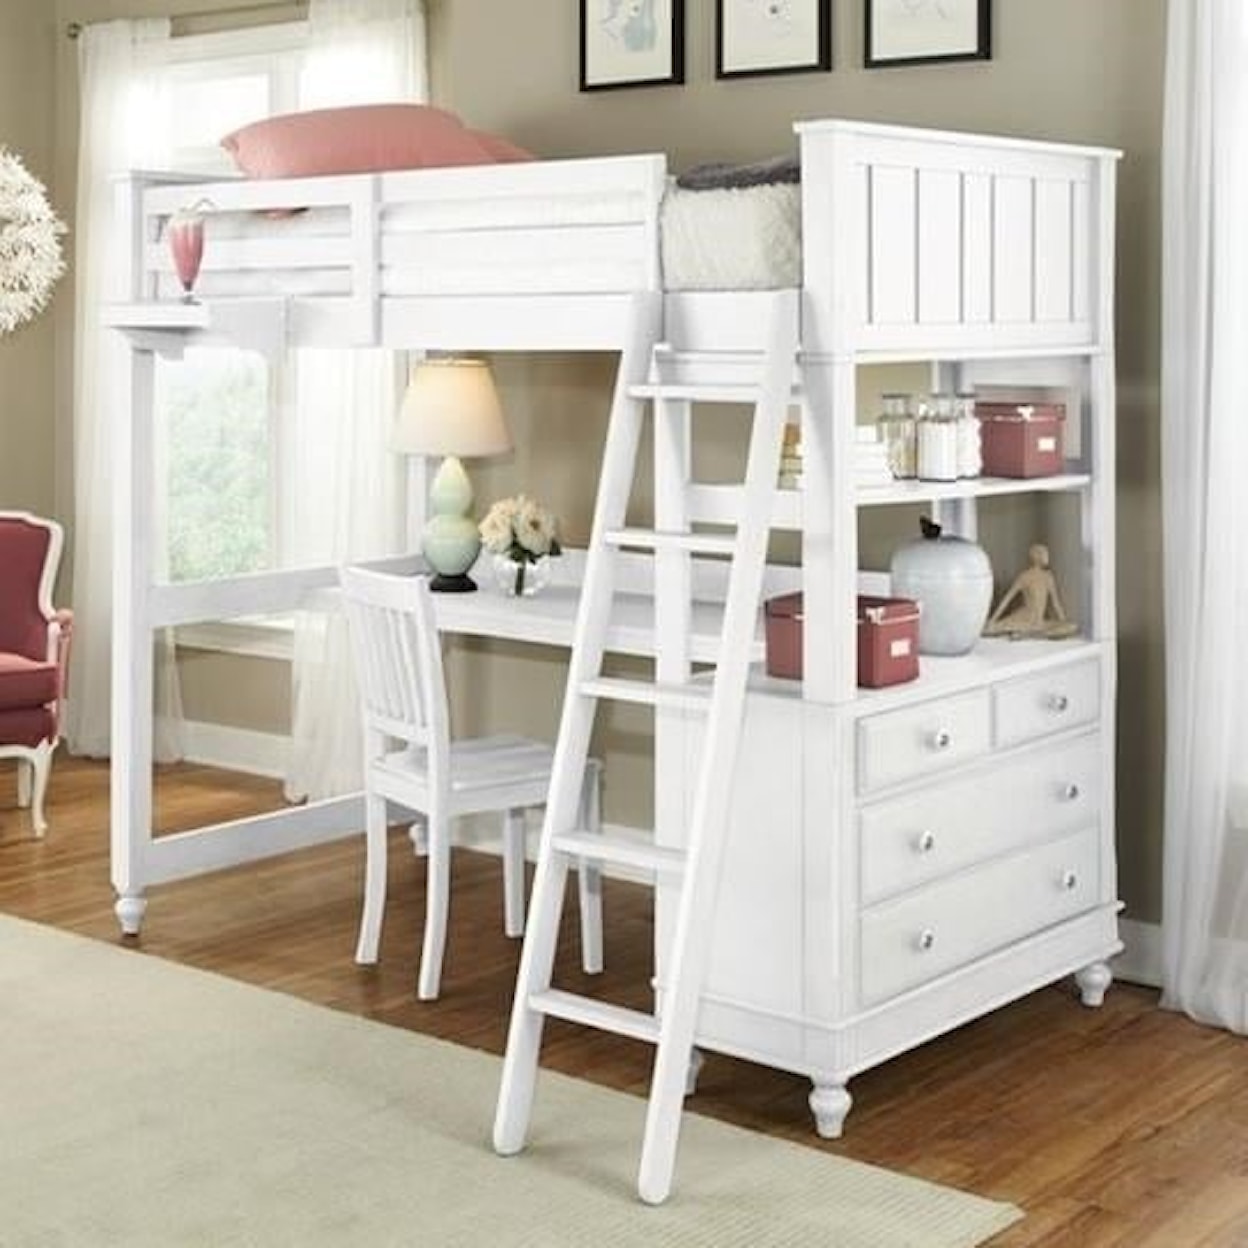 Hillsdale Kids Lake House Twin Loft Bed with Desk